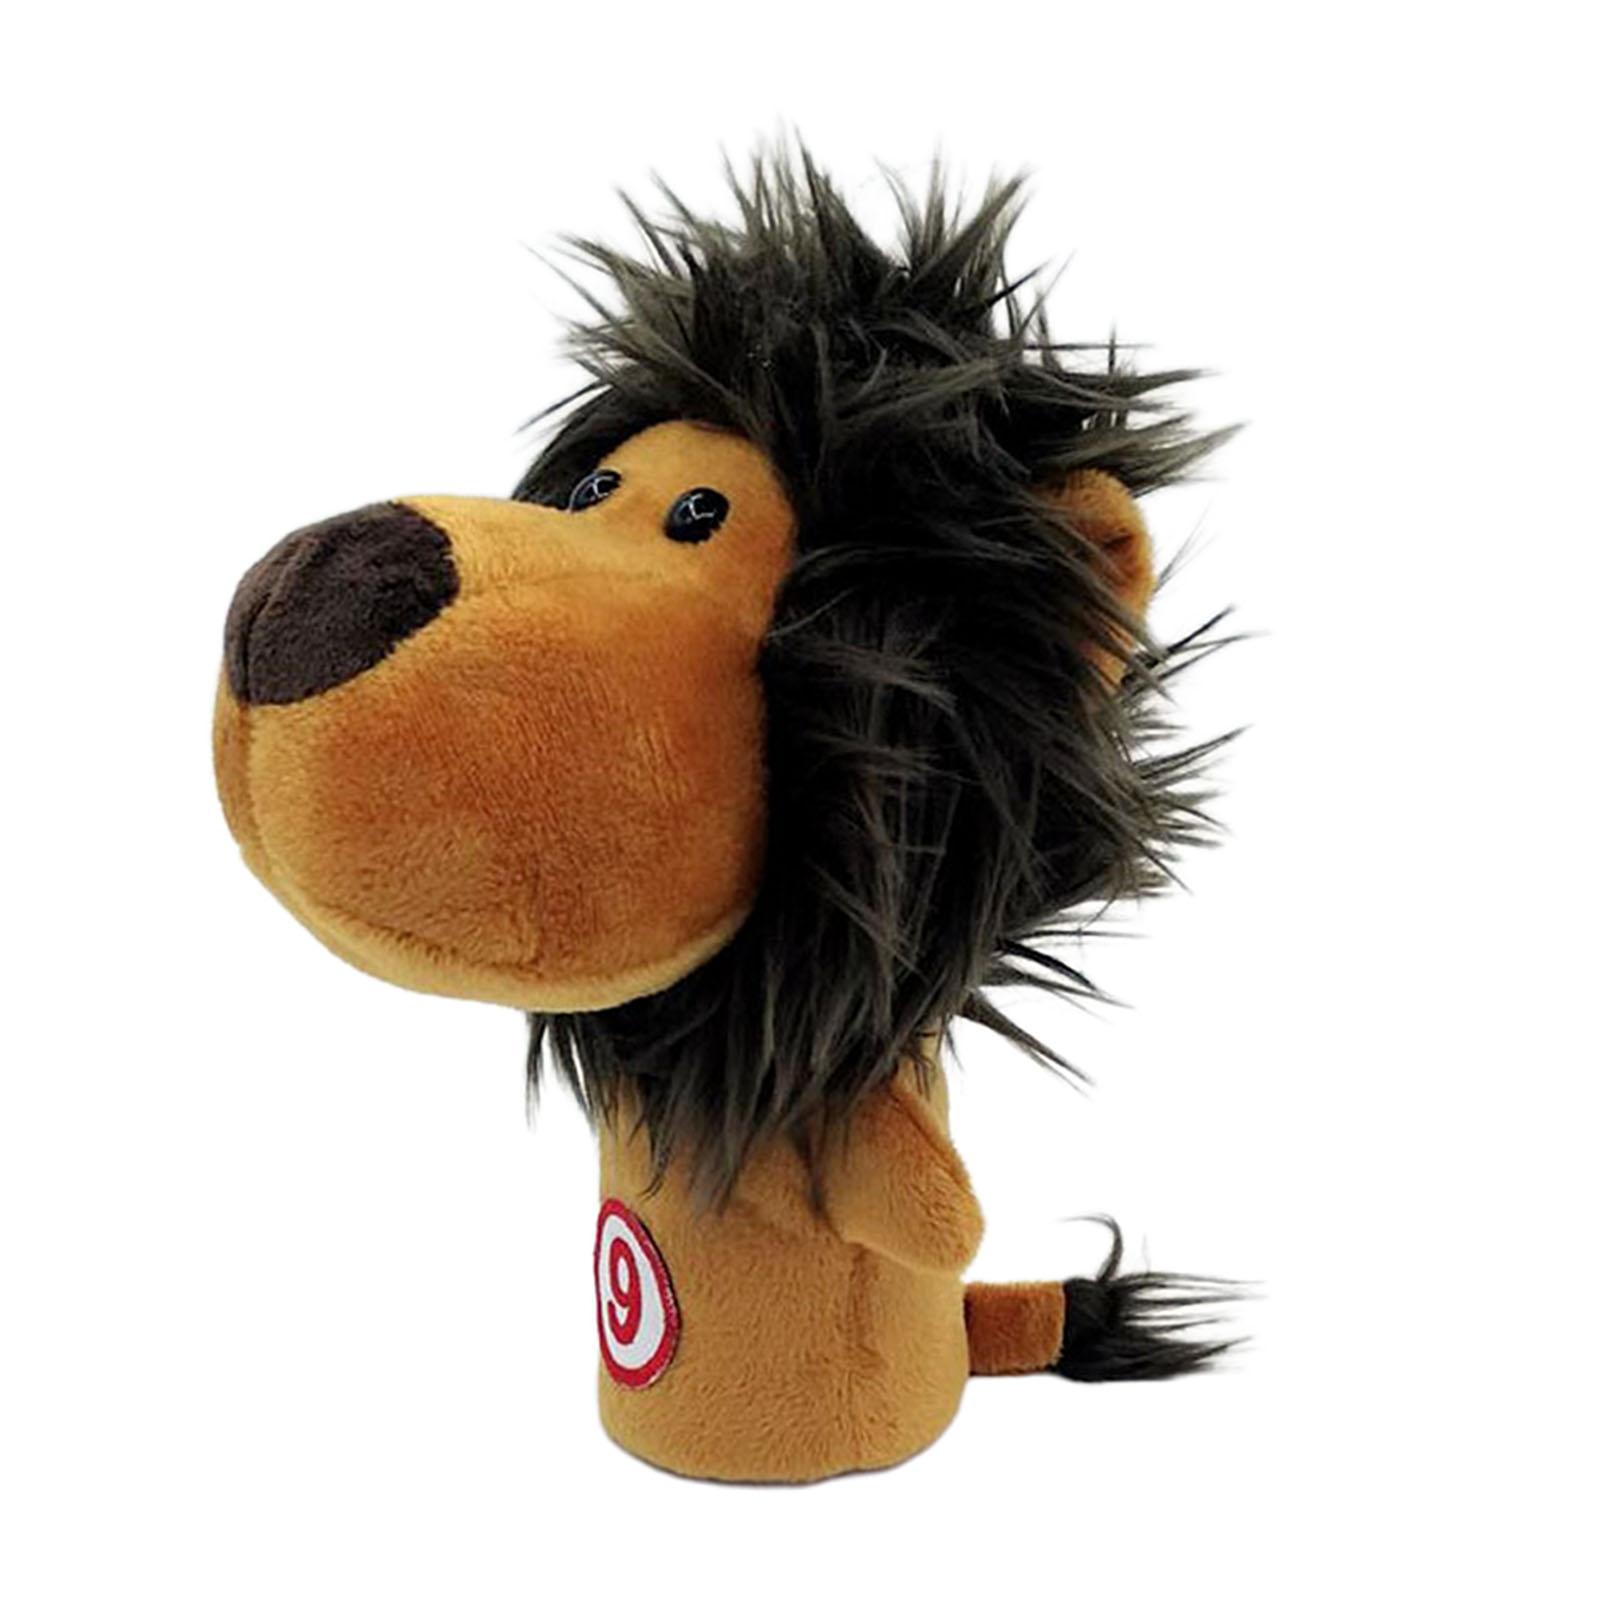 Novelty Plush Animal Golf Iron Headcover Wedges Club Head Cover Lion No.9